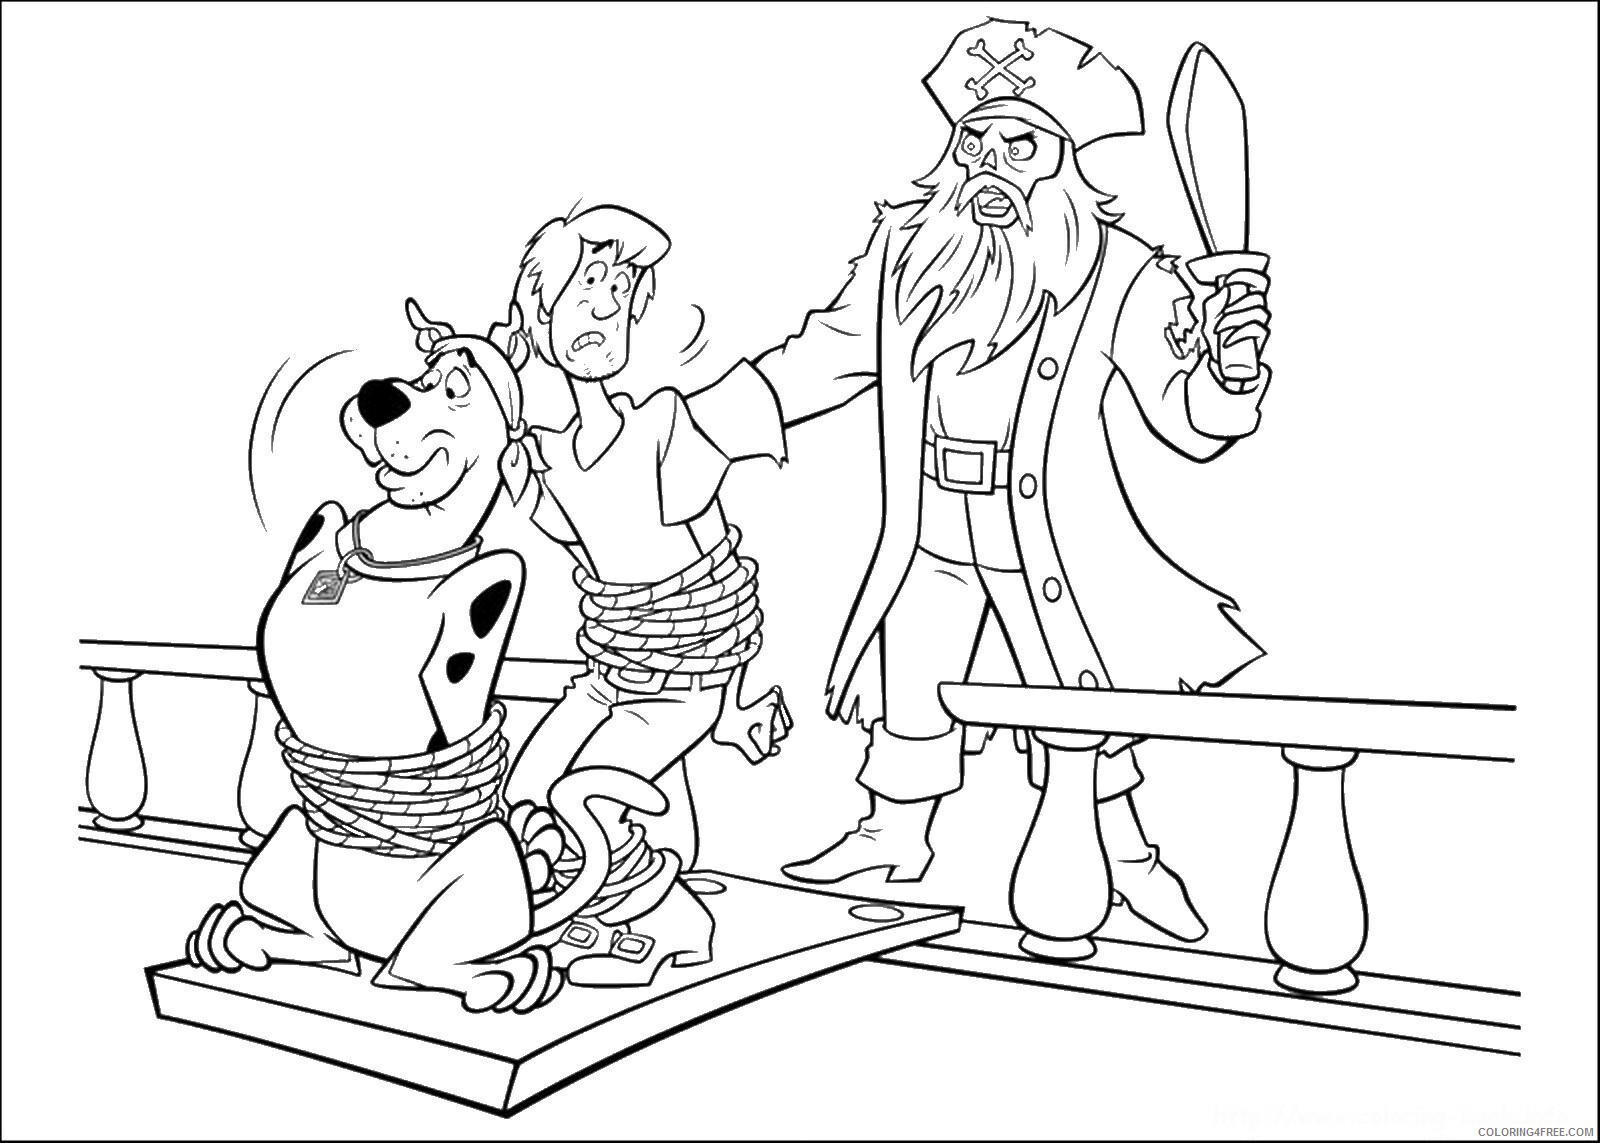 Scooby Doo Coloring Pages TV Film scooby_doo_cl_25 Printable 2020 07272 Coloring4free